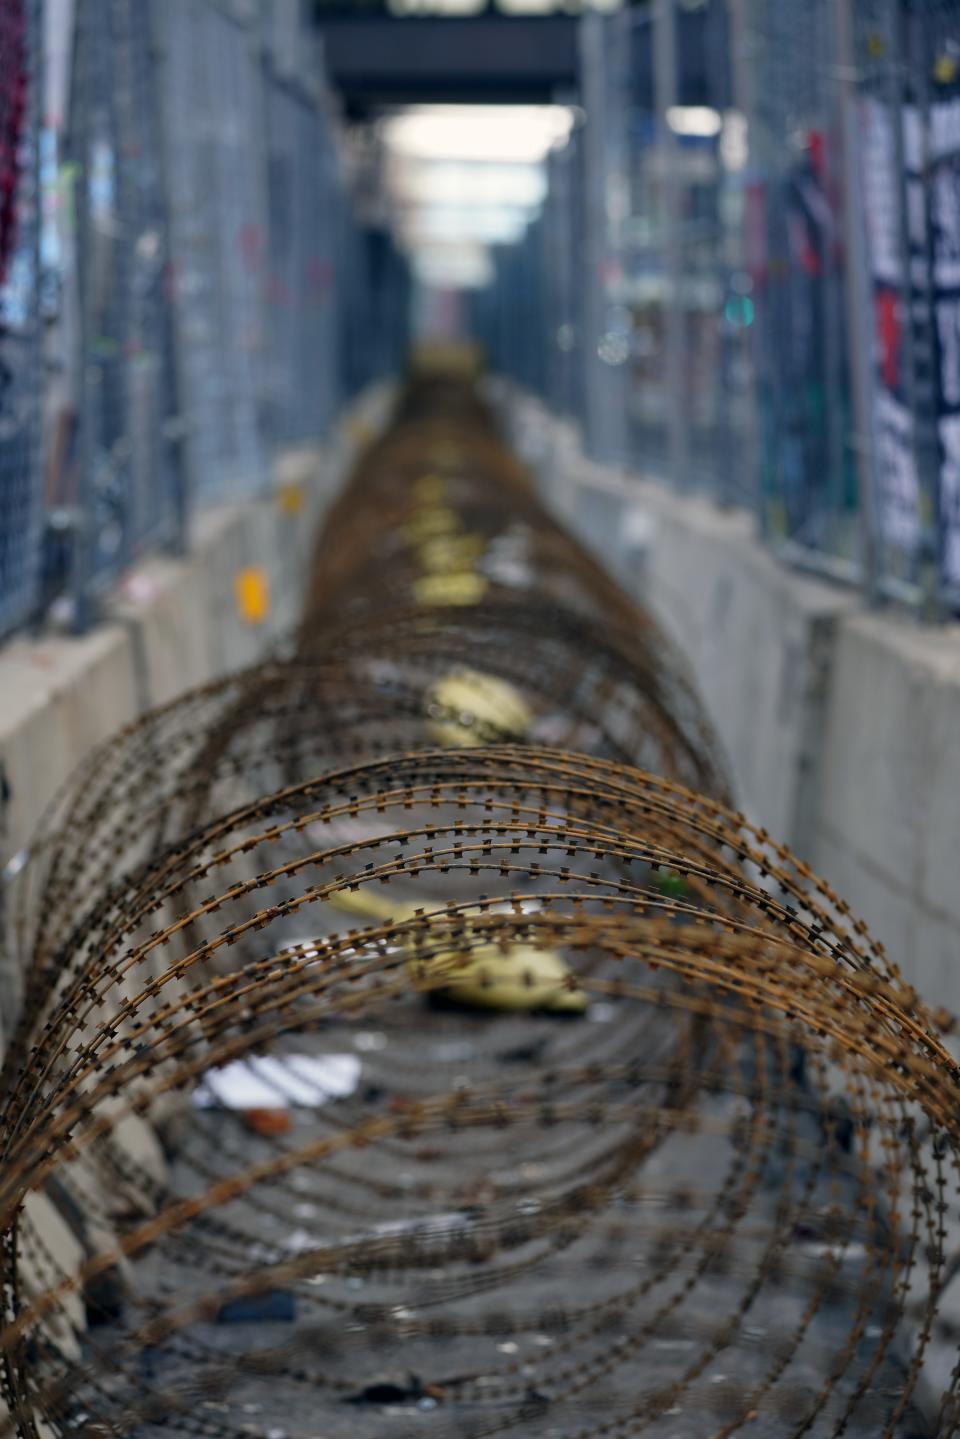 Razor wire fills the gap between two fences surrounding the fortified Hennepin County Government Center during the trial of former Minneapolis police officer Derek Chauvin, who is accused of killing George Floyd.